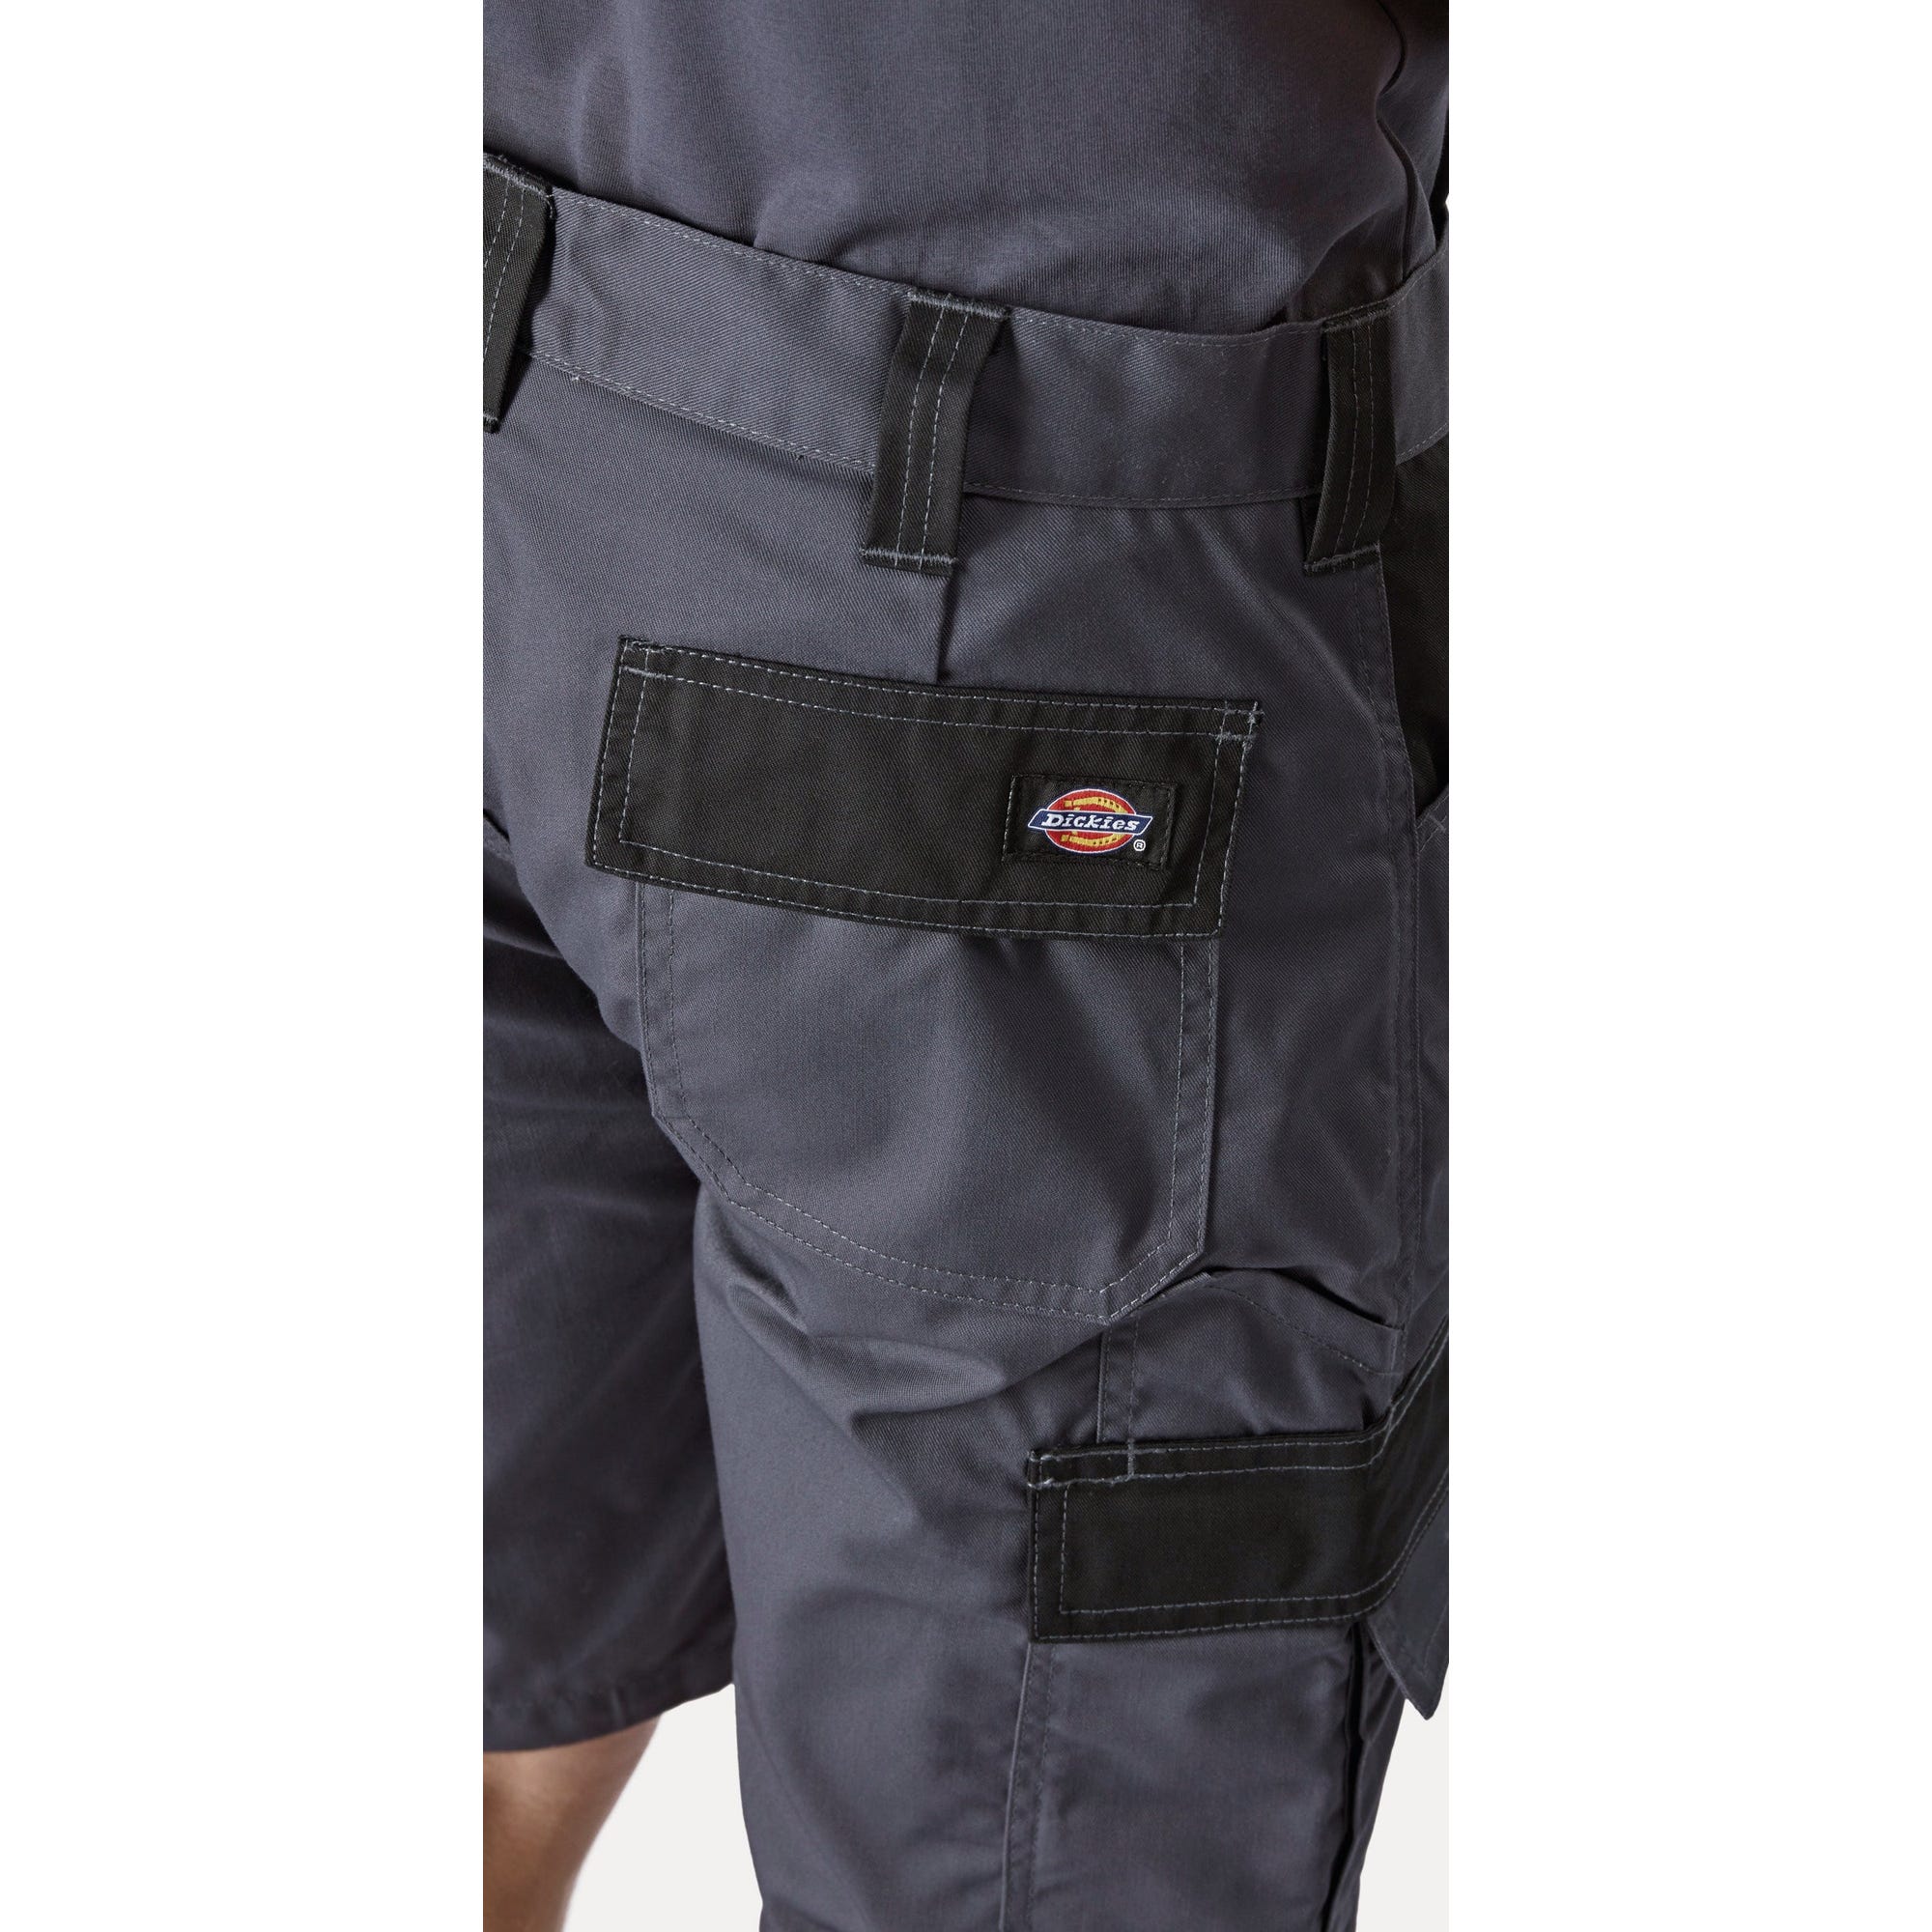 Short Everyday Noir - Dickies - Taille 52 8